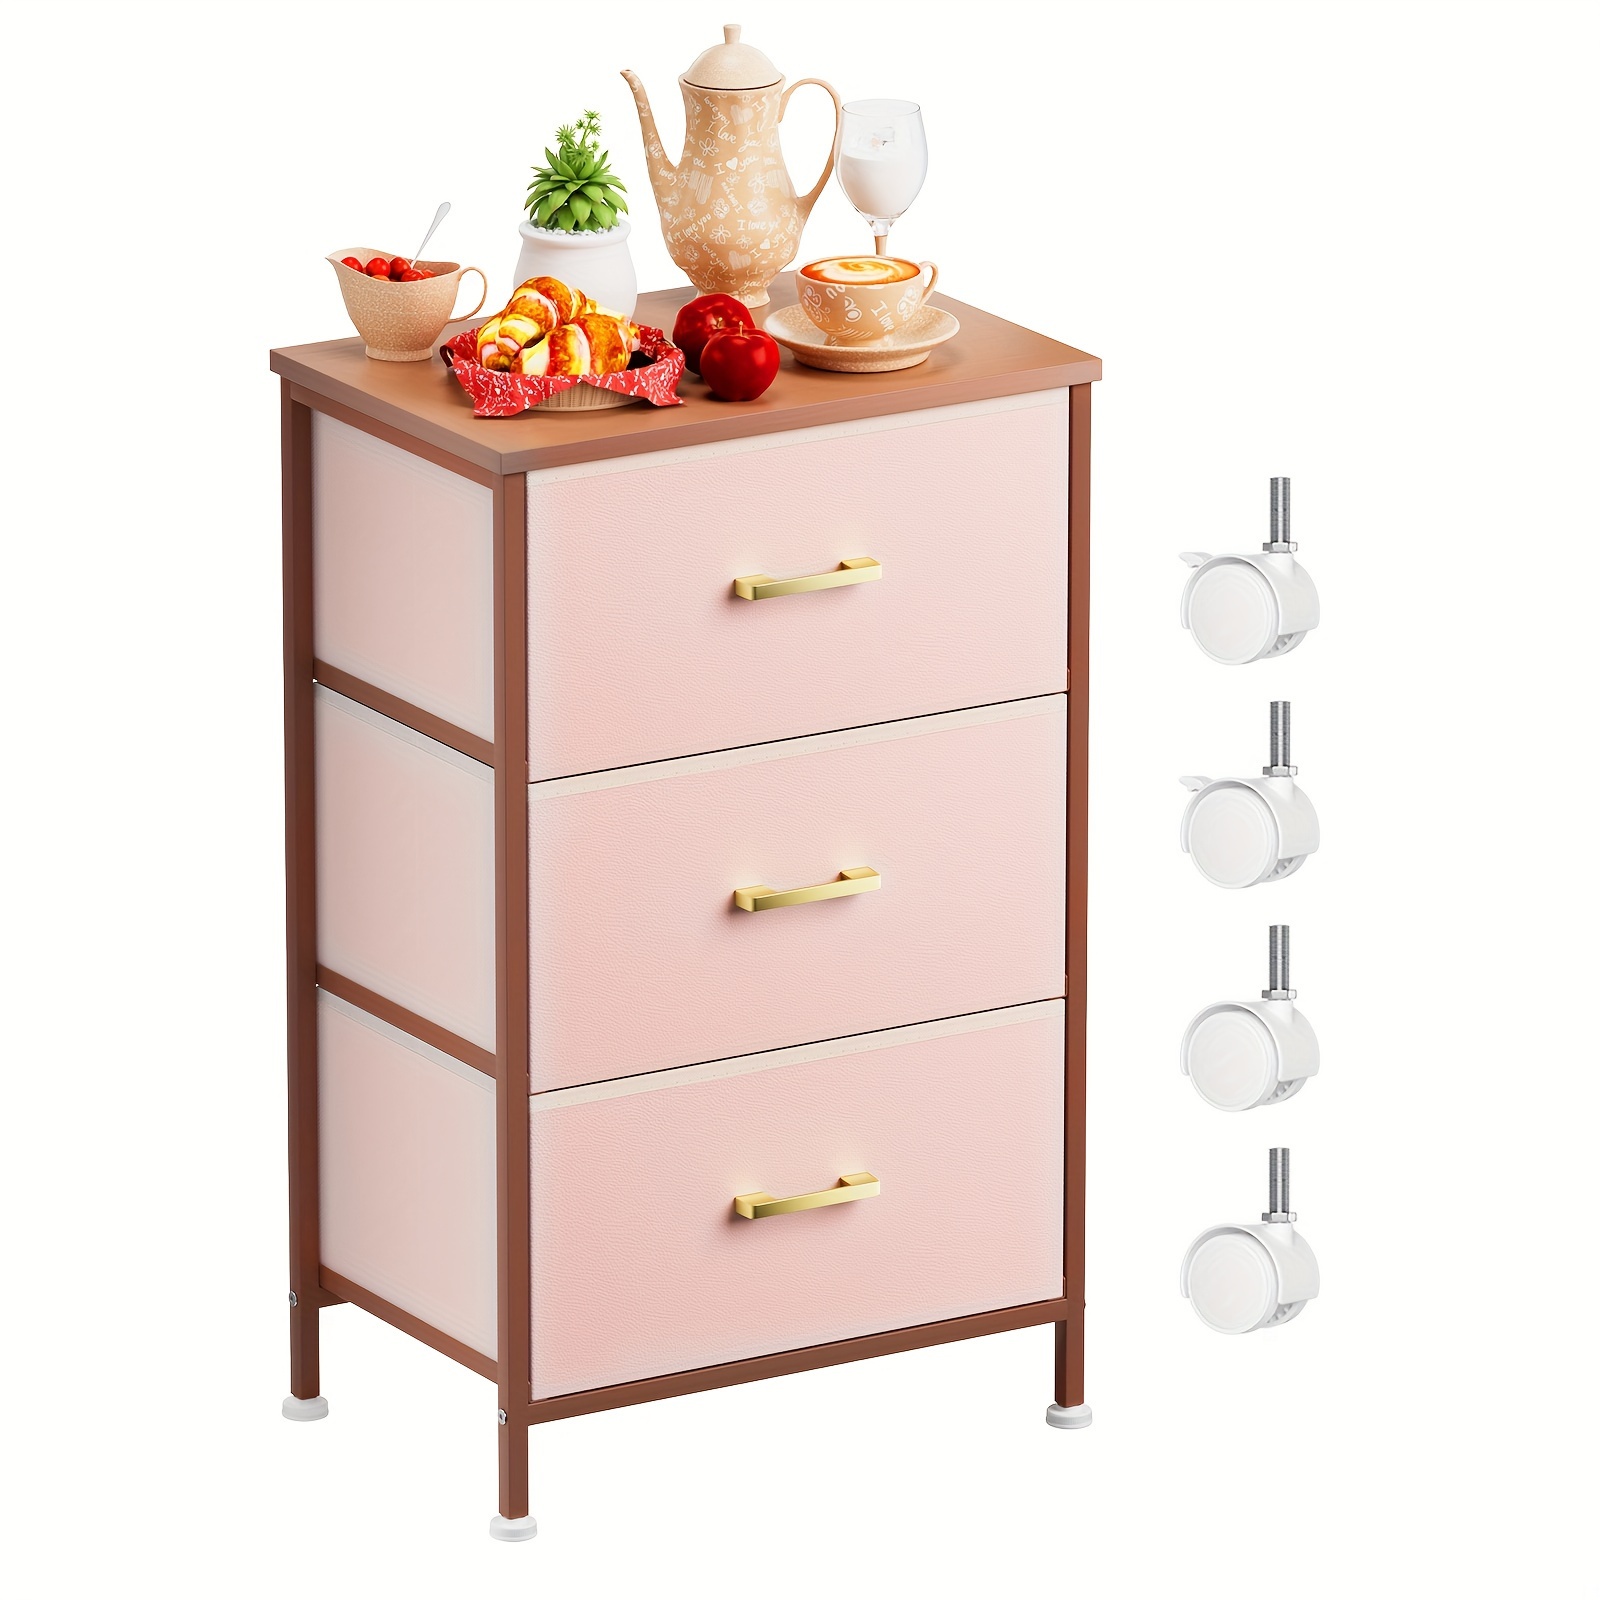 

Nightstand, Small Dresser For Bedroom, End Table With 3 Drawer, Leather Finish Pink Night Stand